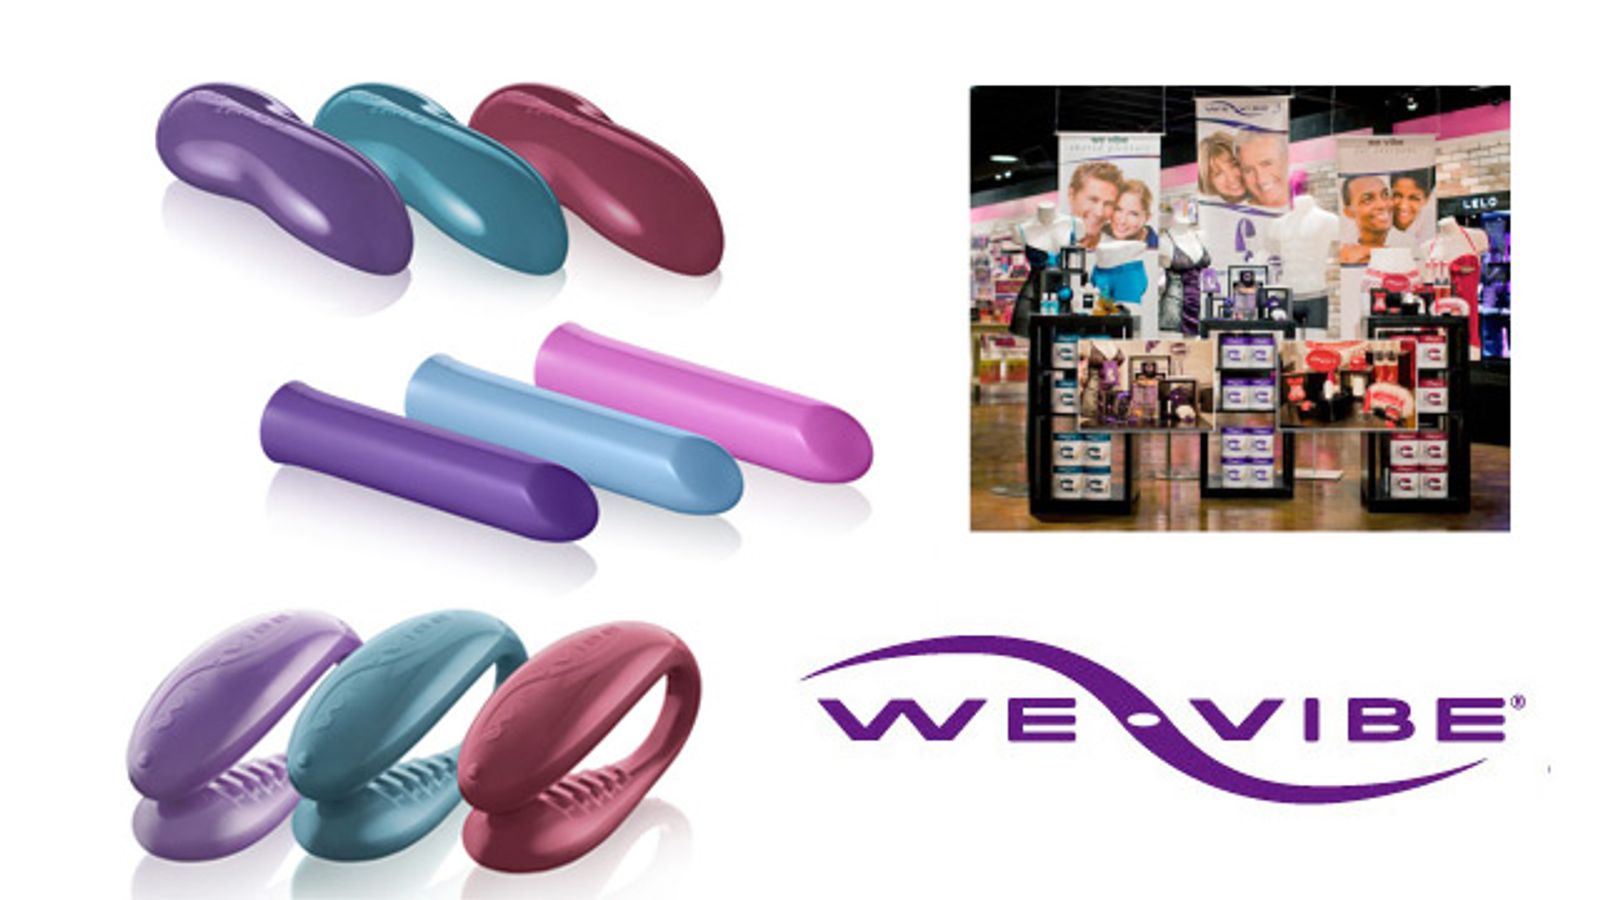 Standard Innovation Recognizes We-Vibe Enthusiasm With Prizes